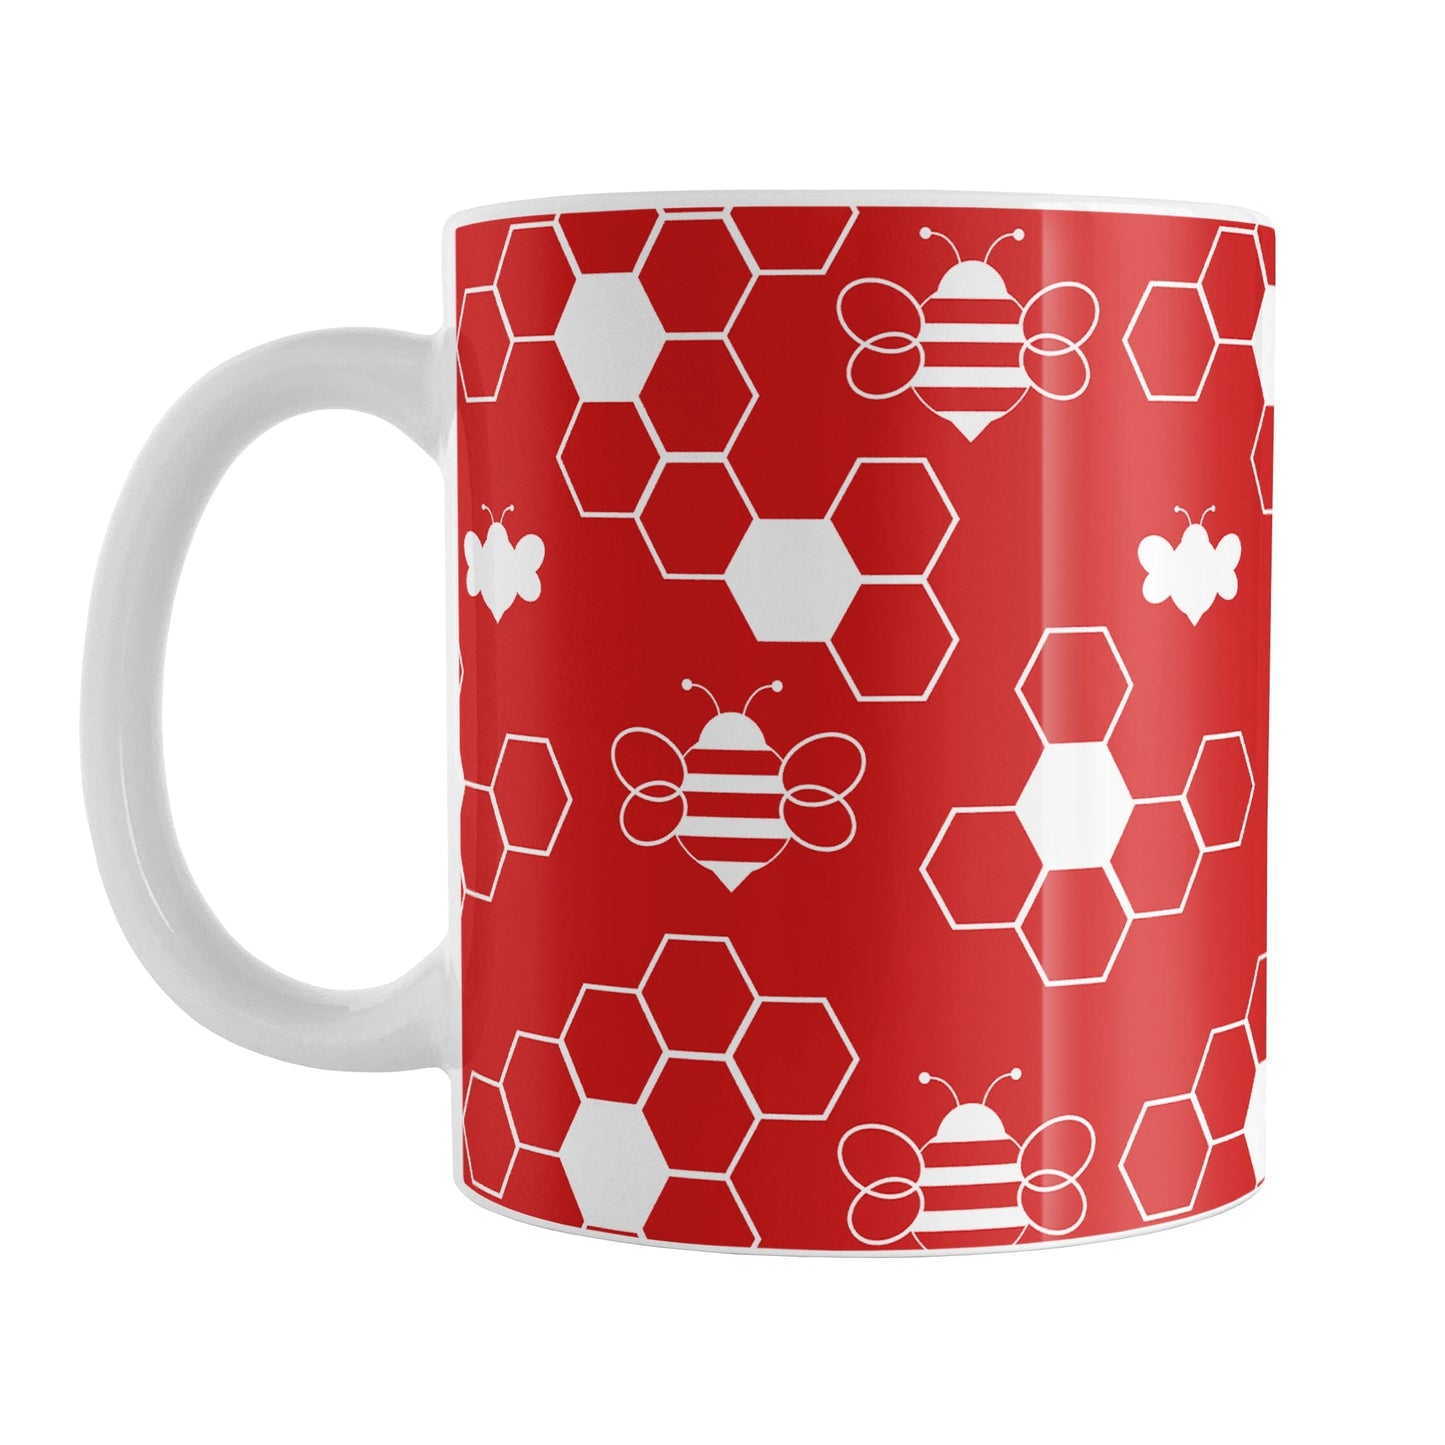 Red and White Bee Mug (11oz) at Amy's Coffee Mugs. A ceramic coffee mug designed with white lined and silhouette bees and honeycomb in a sleek pattern over a red background color that wraps around the mug up to the handle.